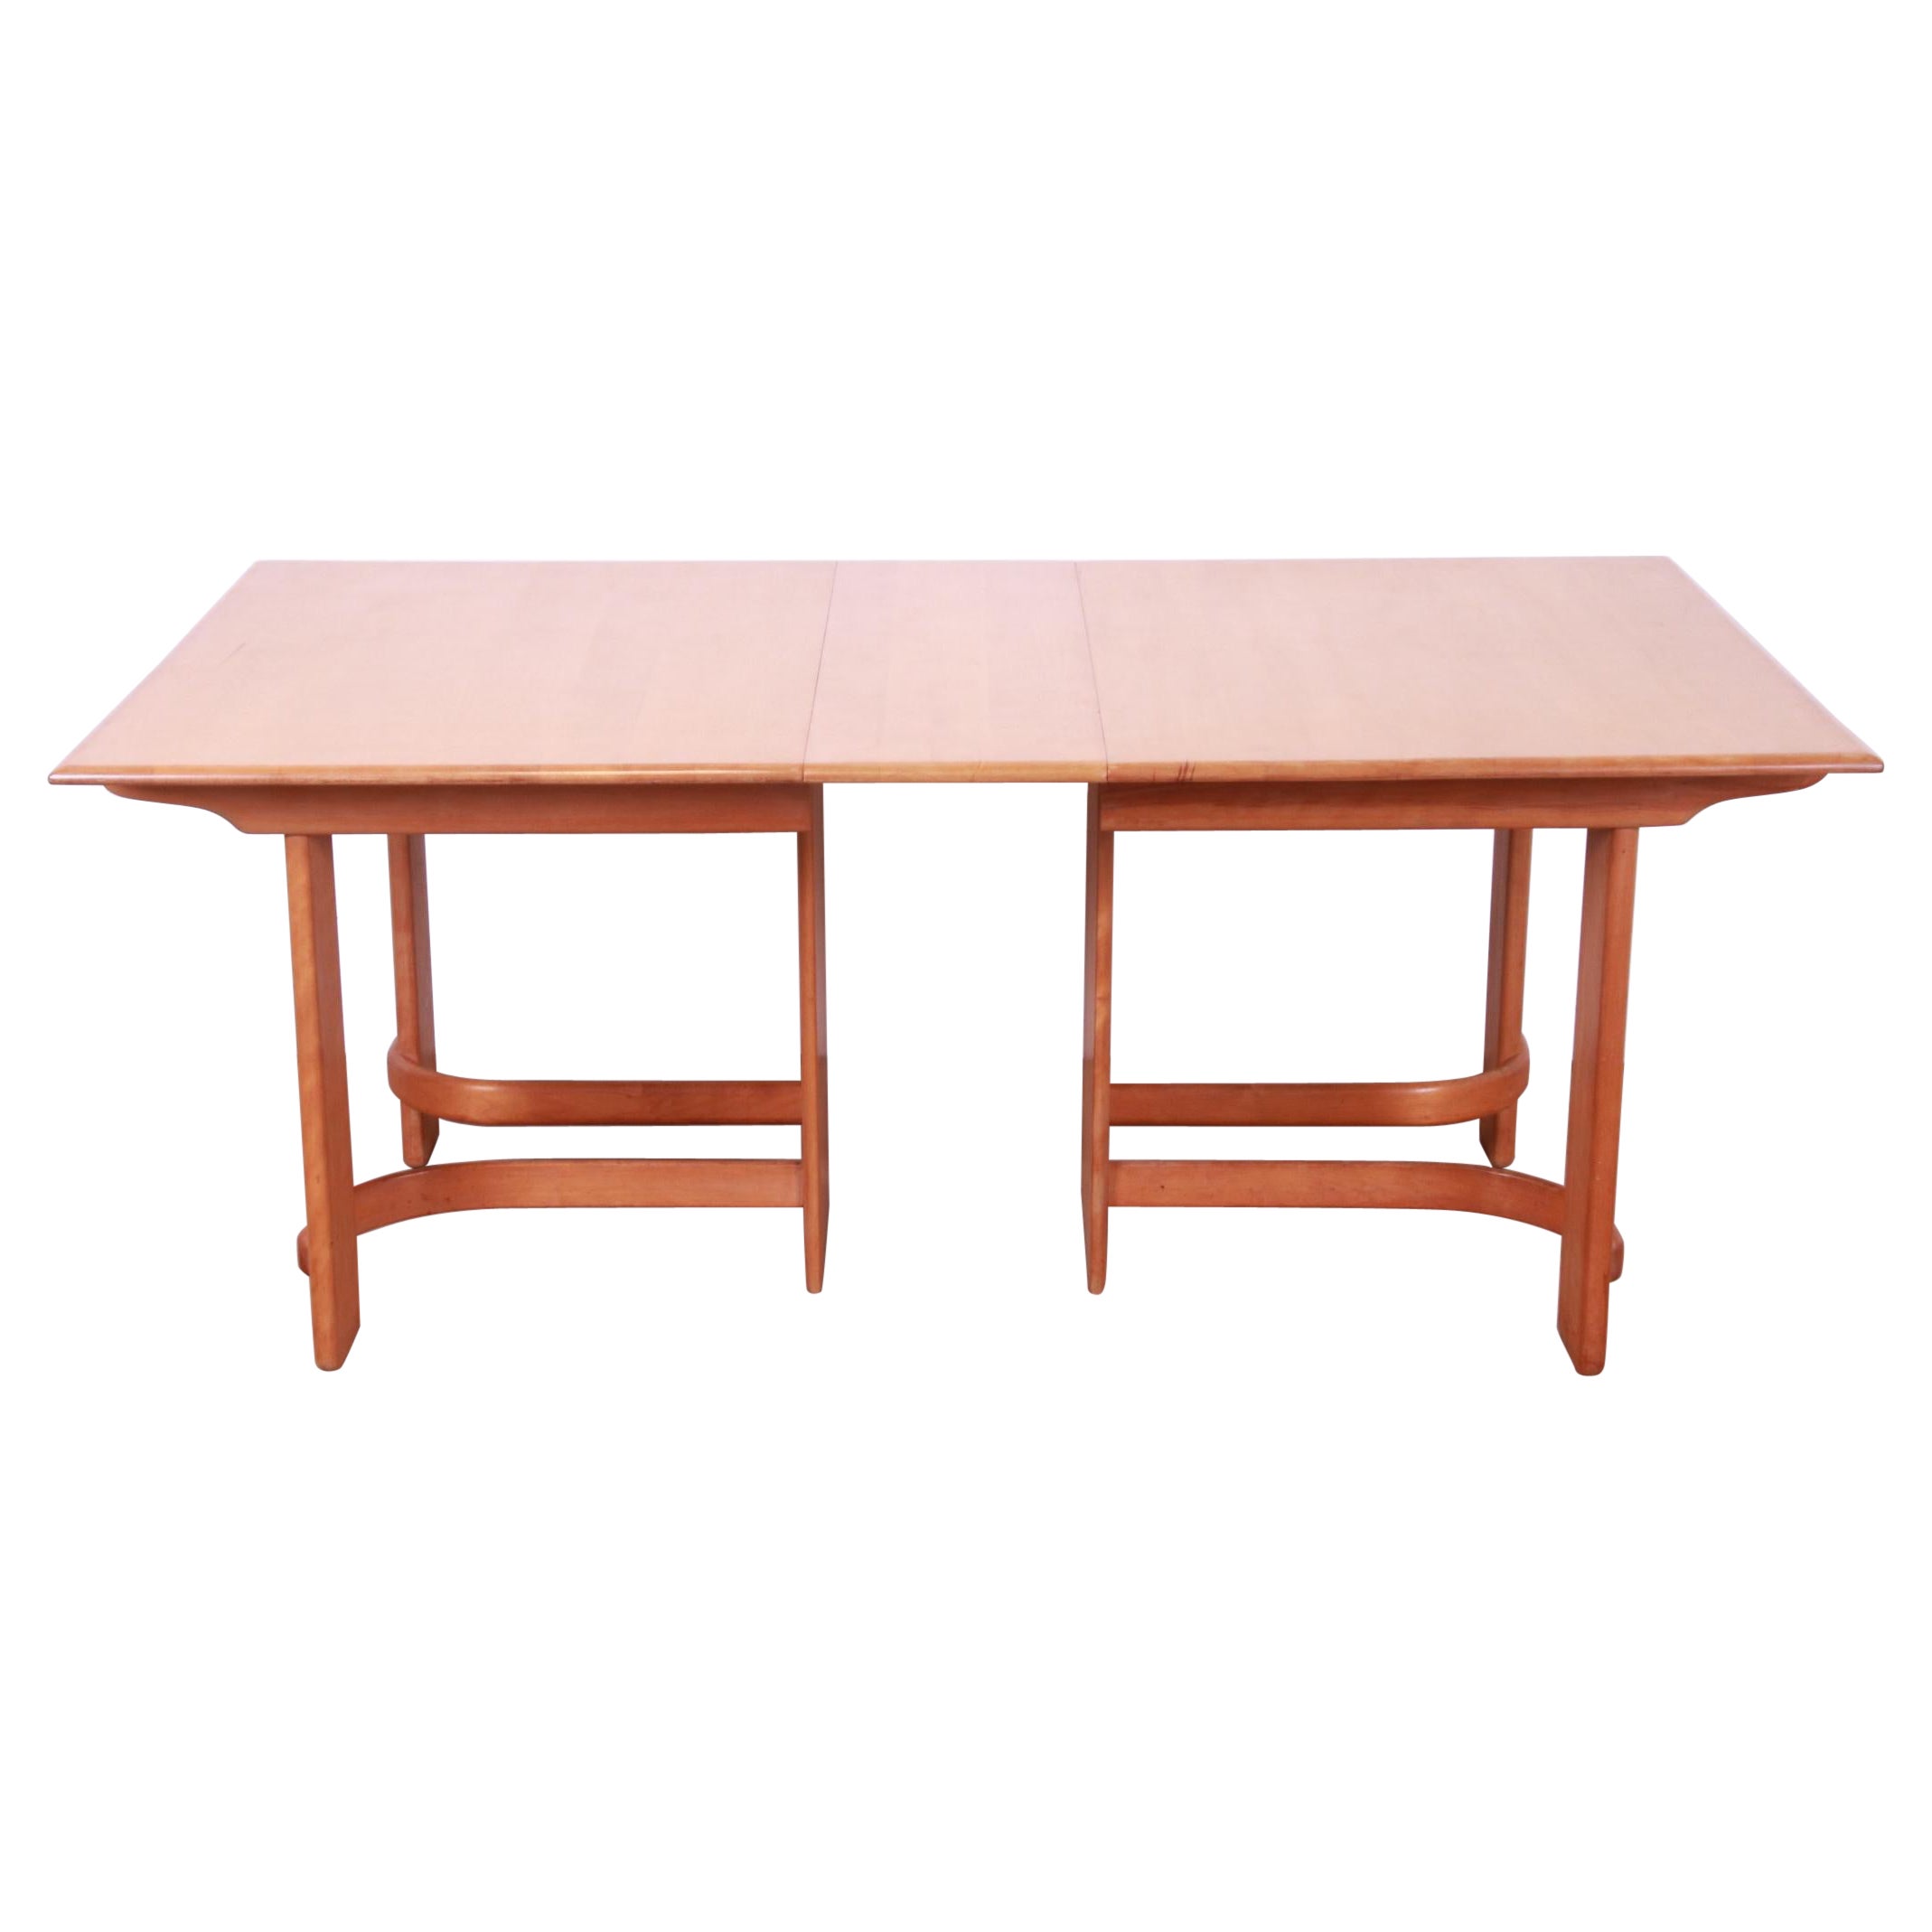 Gilbert Rohde for Heywood Wakefield Art Deco Maple Dining Table, 1930s